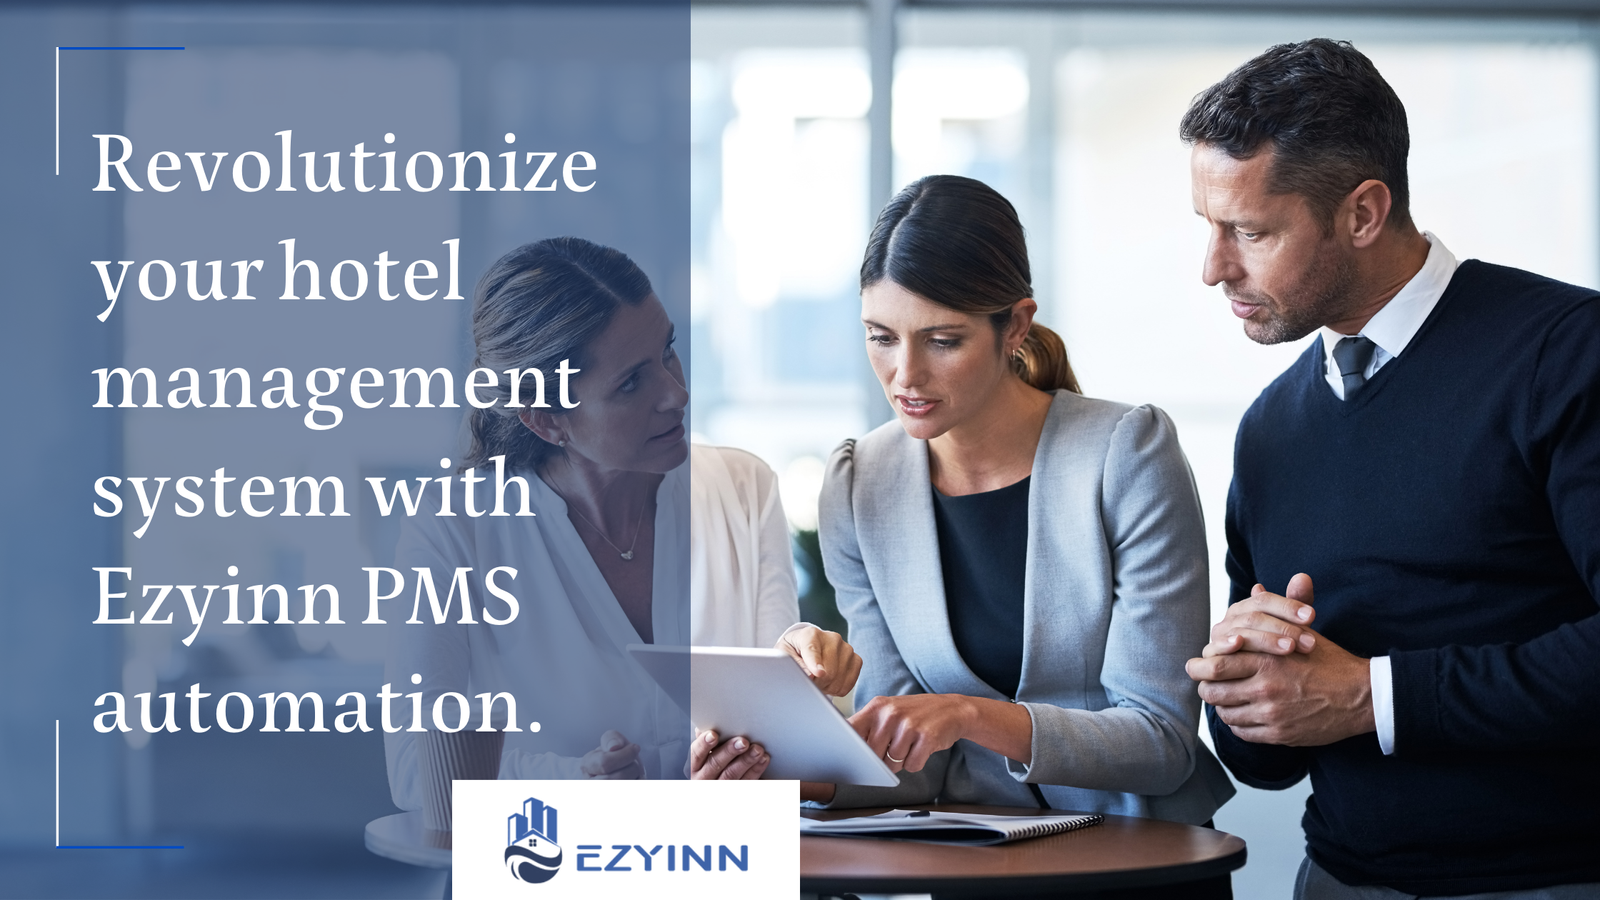 Revolutionize your hotel management system with Ezyinn PMS automation.